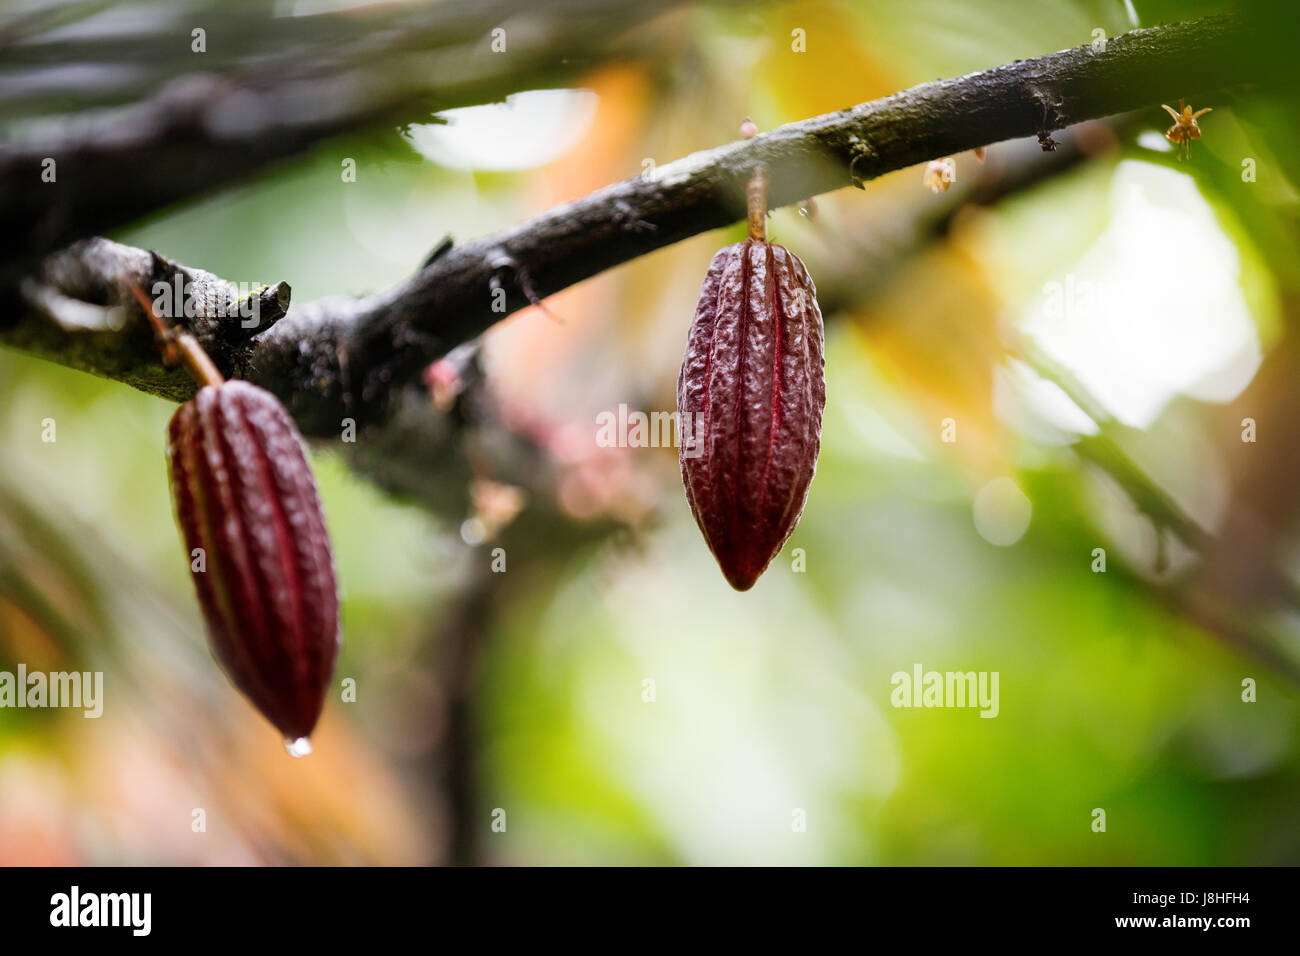 Fresh cacao pods in red variety Stock Photo